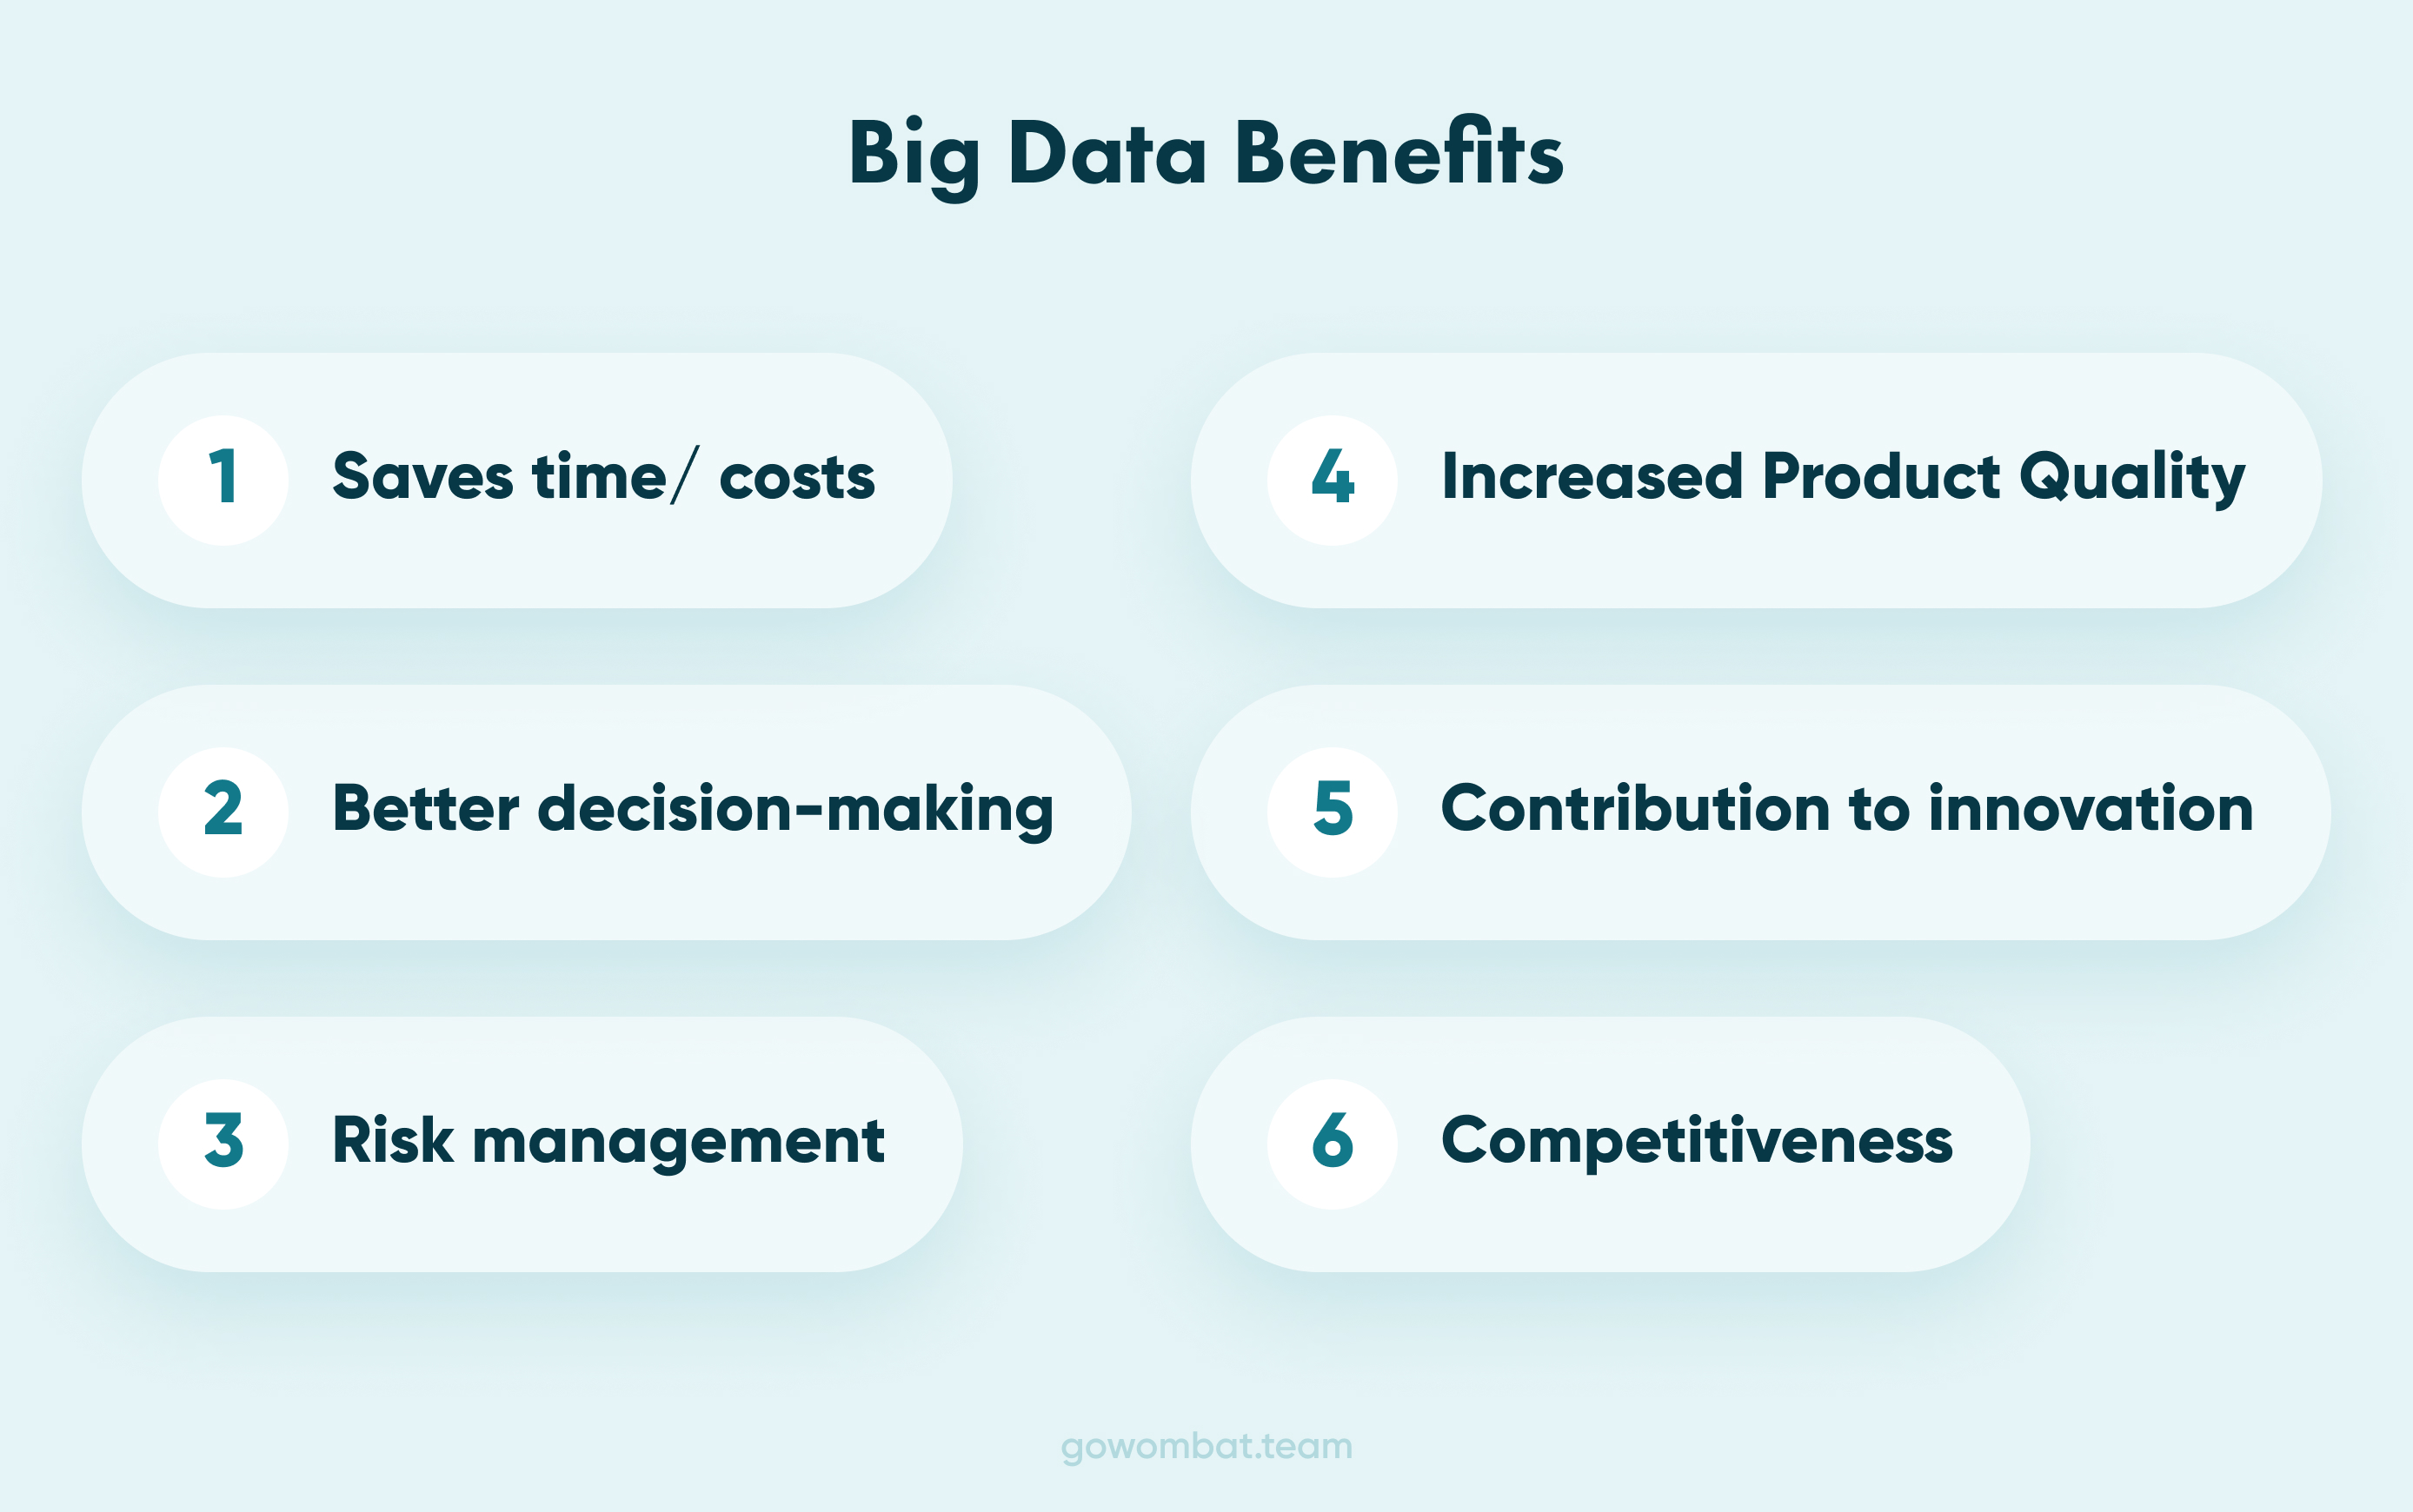 There are many advantages of incorporating big data within a software project aimed at understanding the needs and intentions of customers.